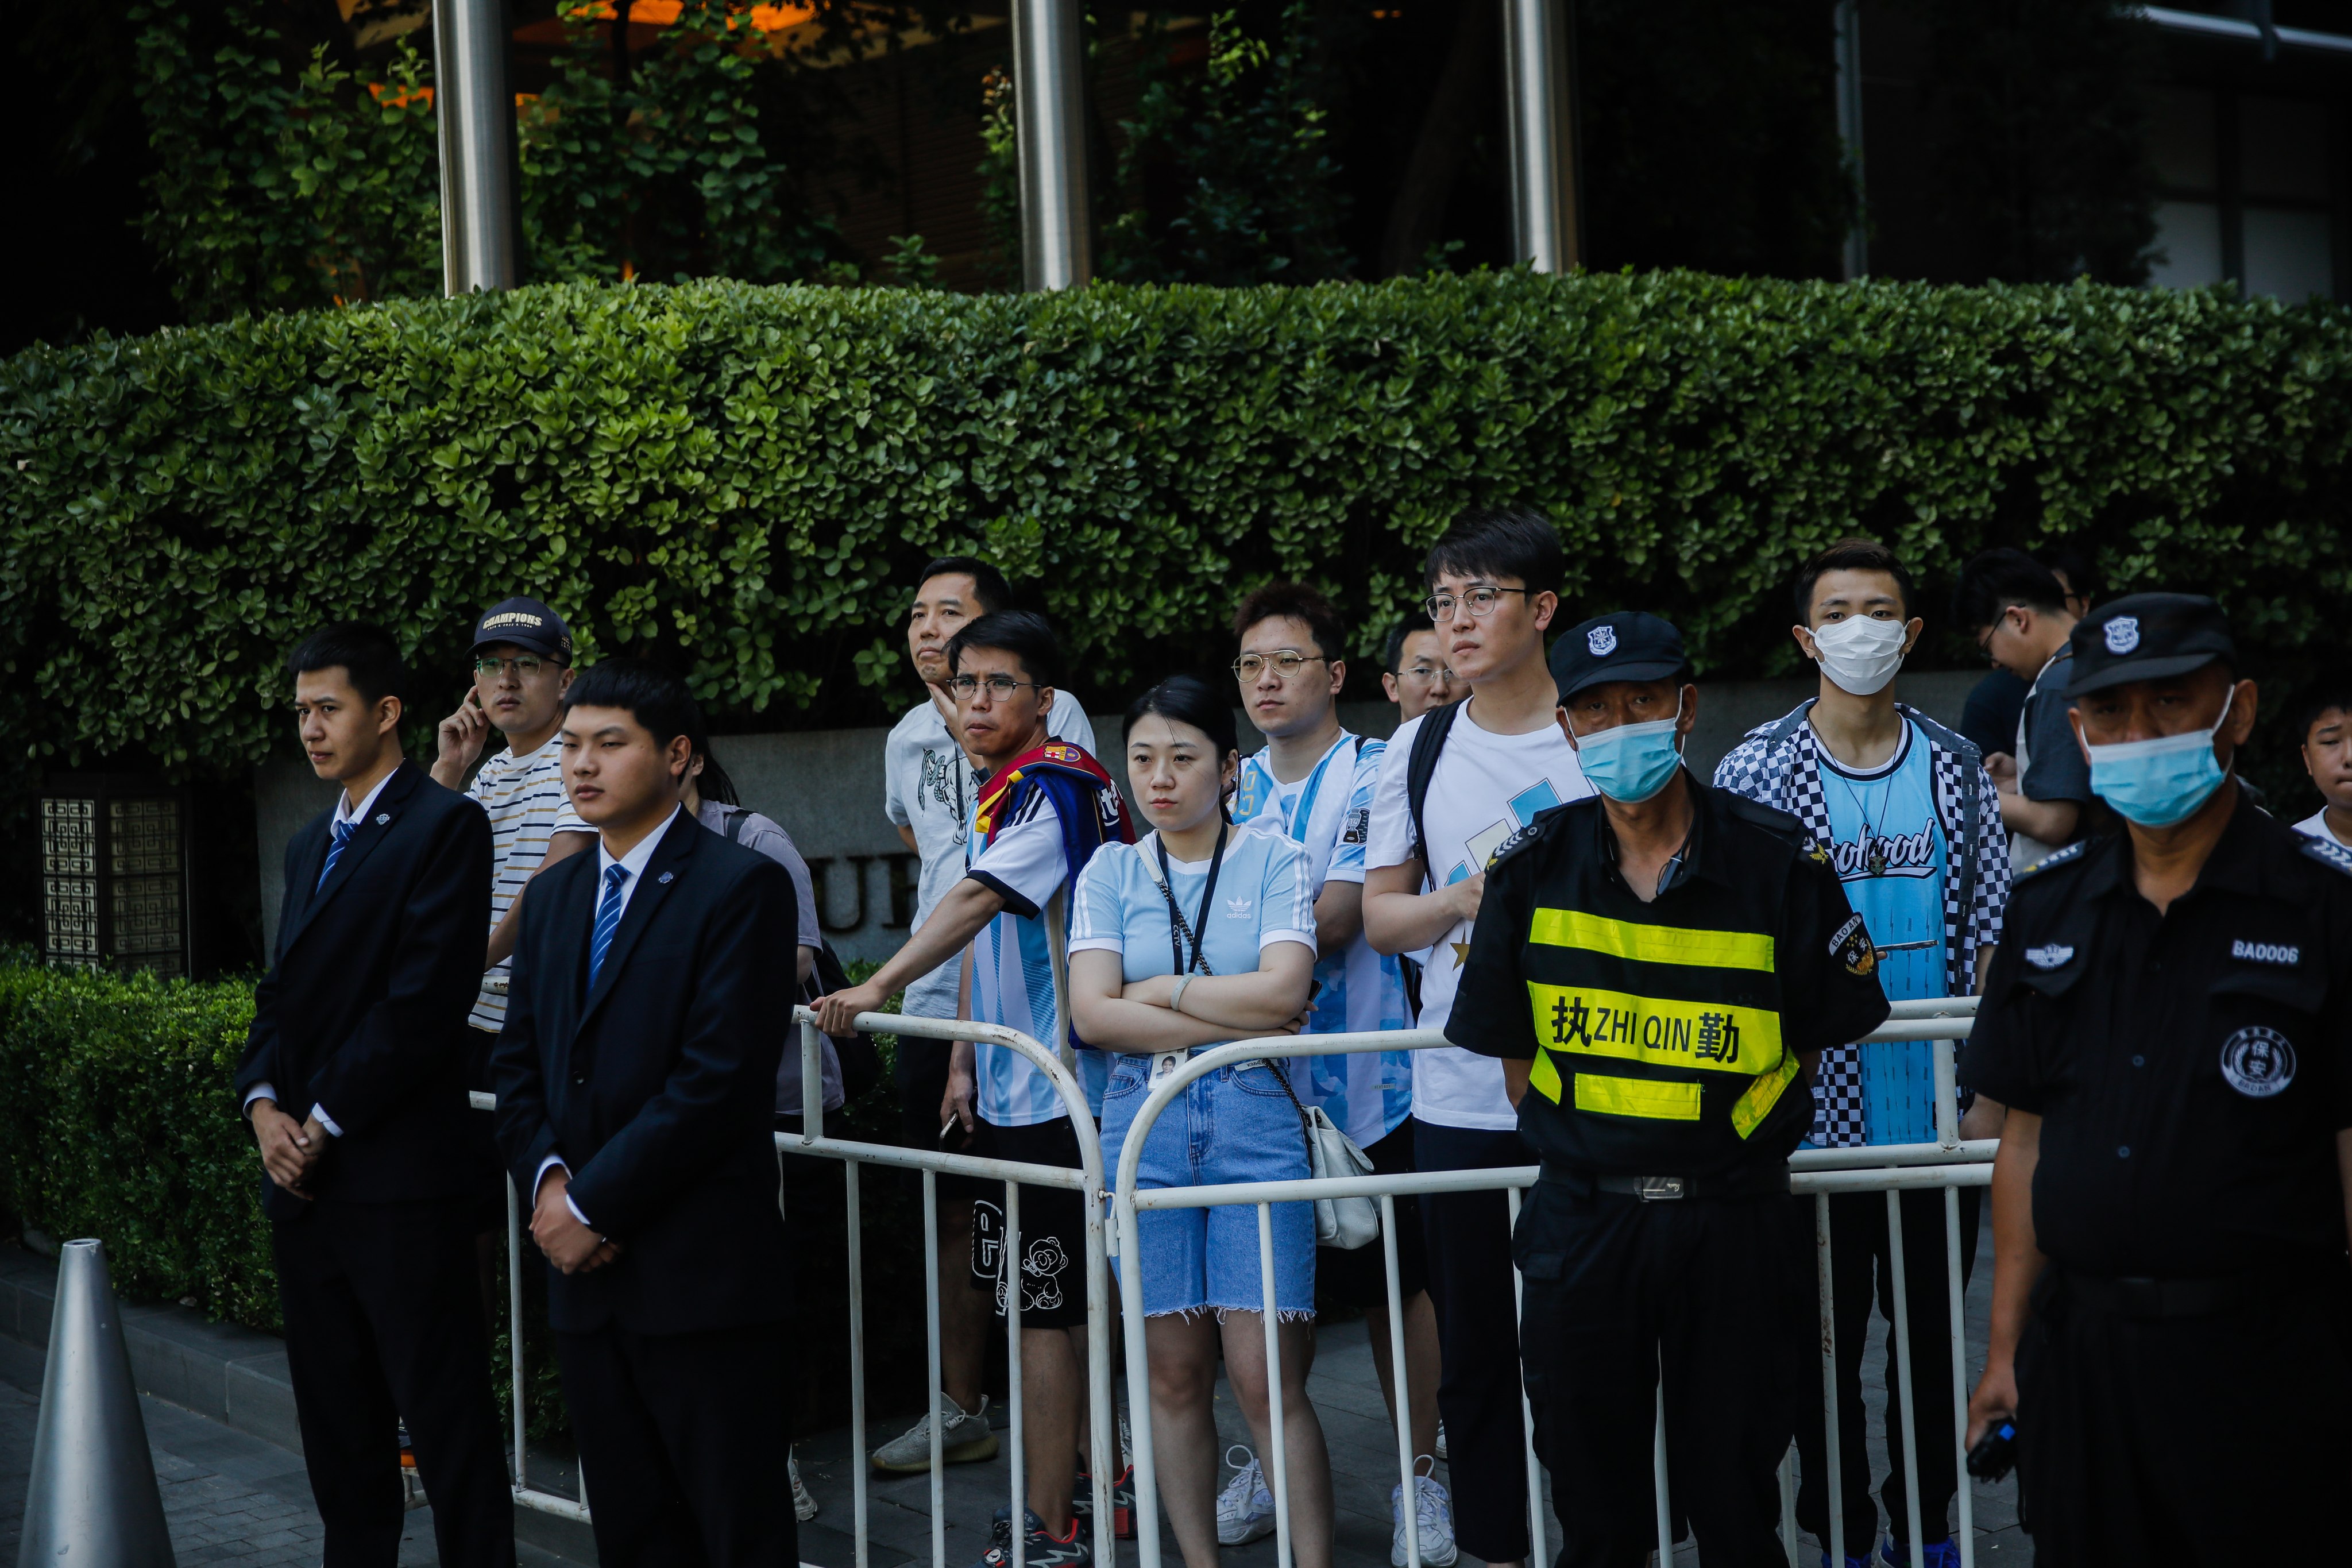 Fans in Beijing wait for the arrival of Lionel Messi at the Argentina team hotel. Photo: EPA-EFE